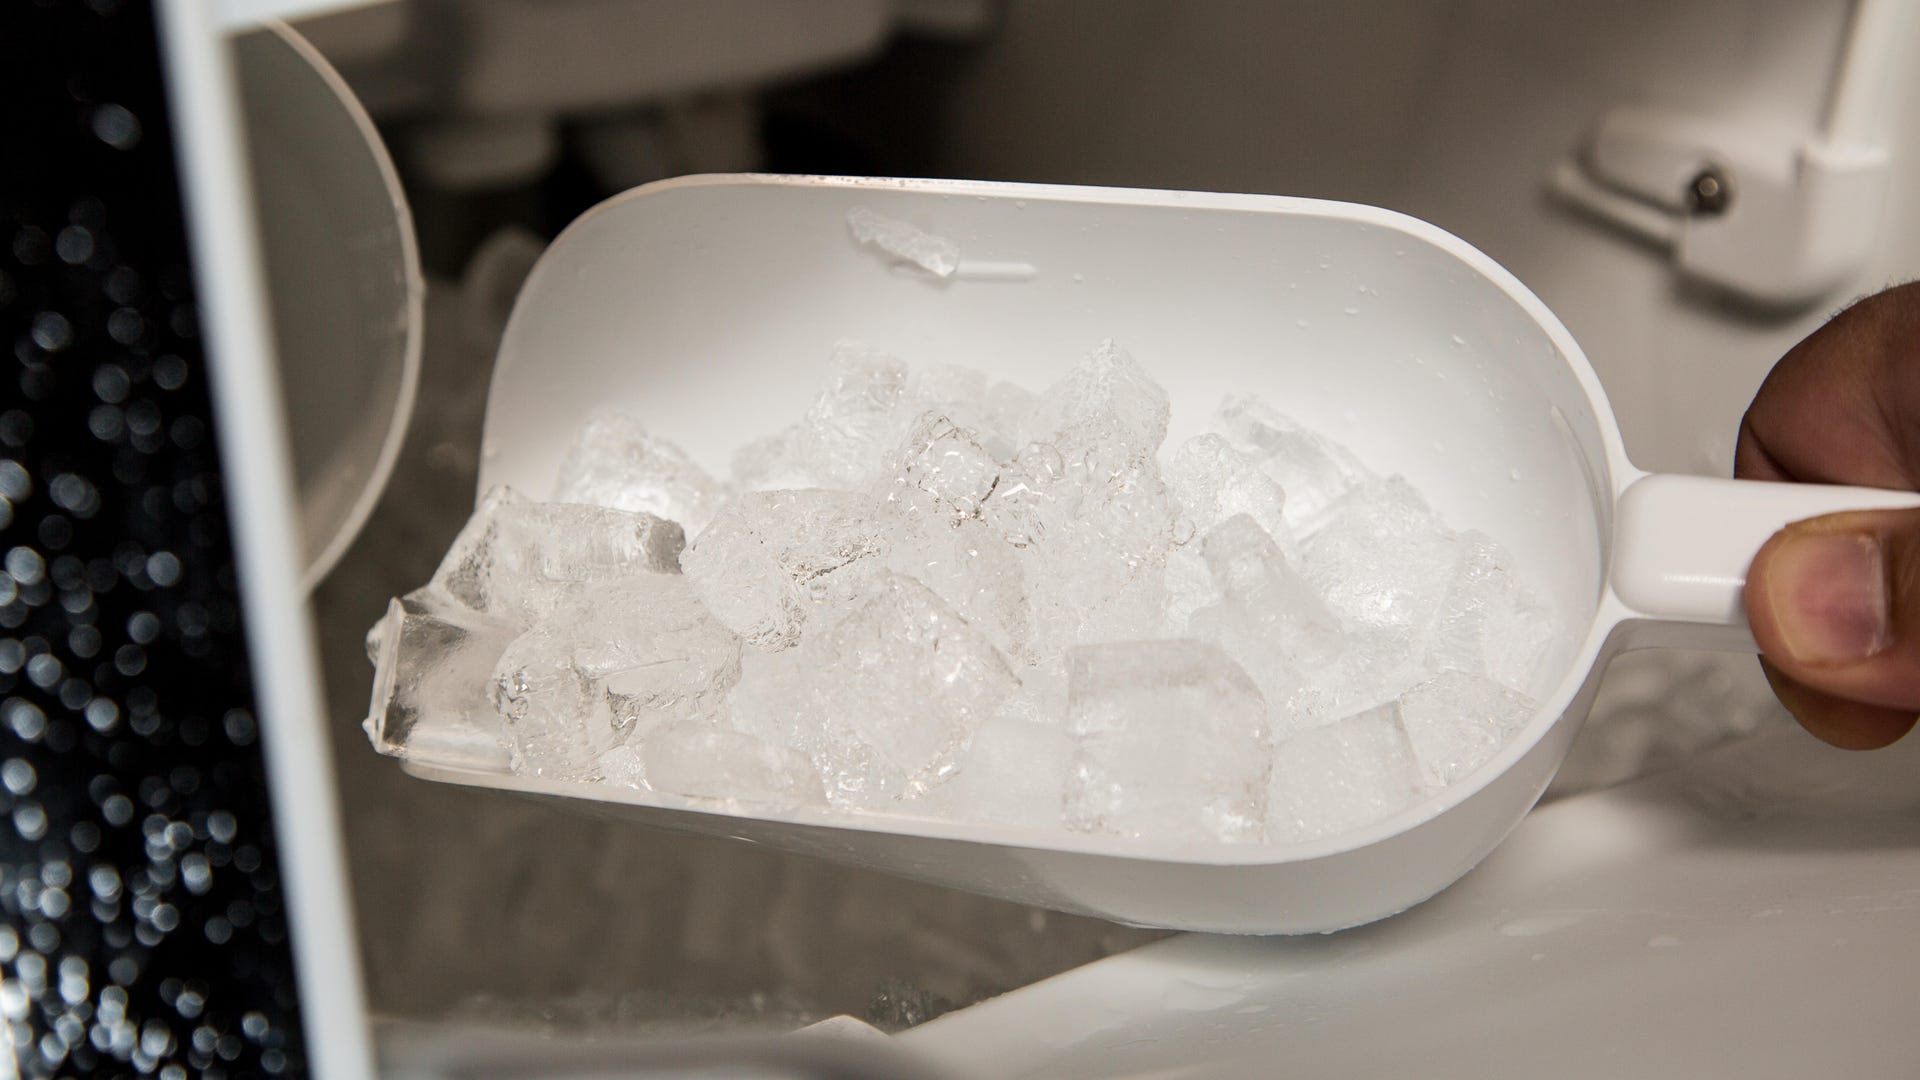 Unsanitary ice scoop can contaminate ice in the bin!